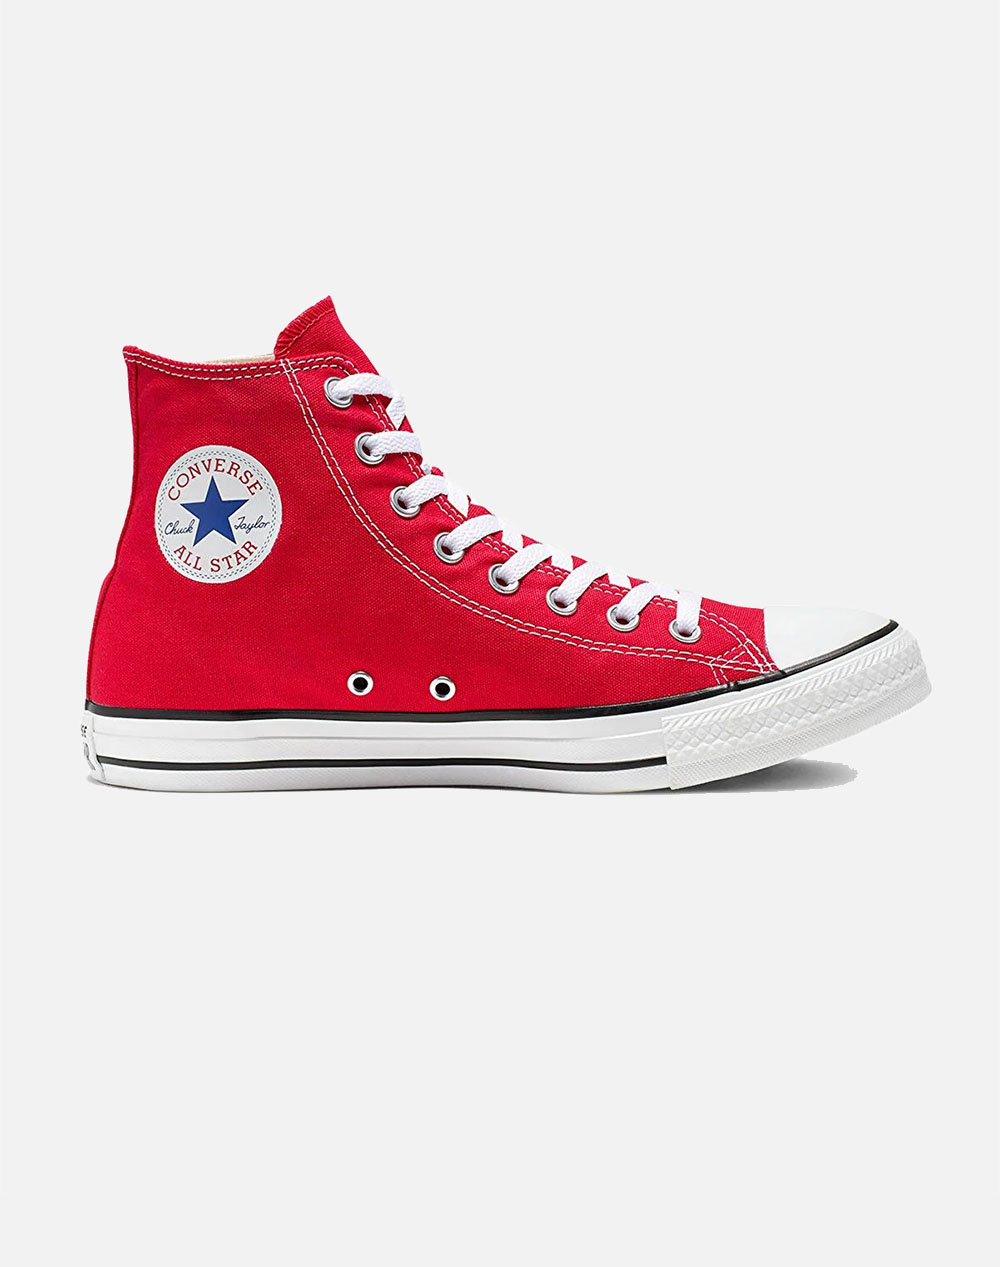 CONVERSE CHUCK TAYLOR ALL STAR M9621C-600 Red